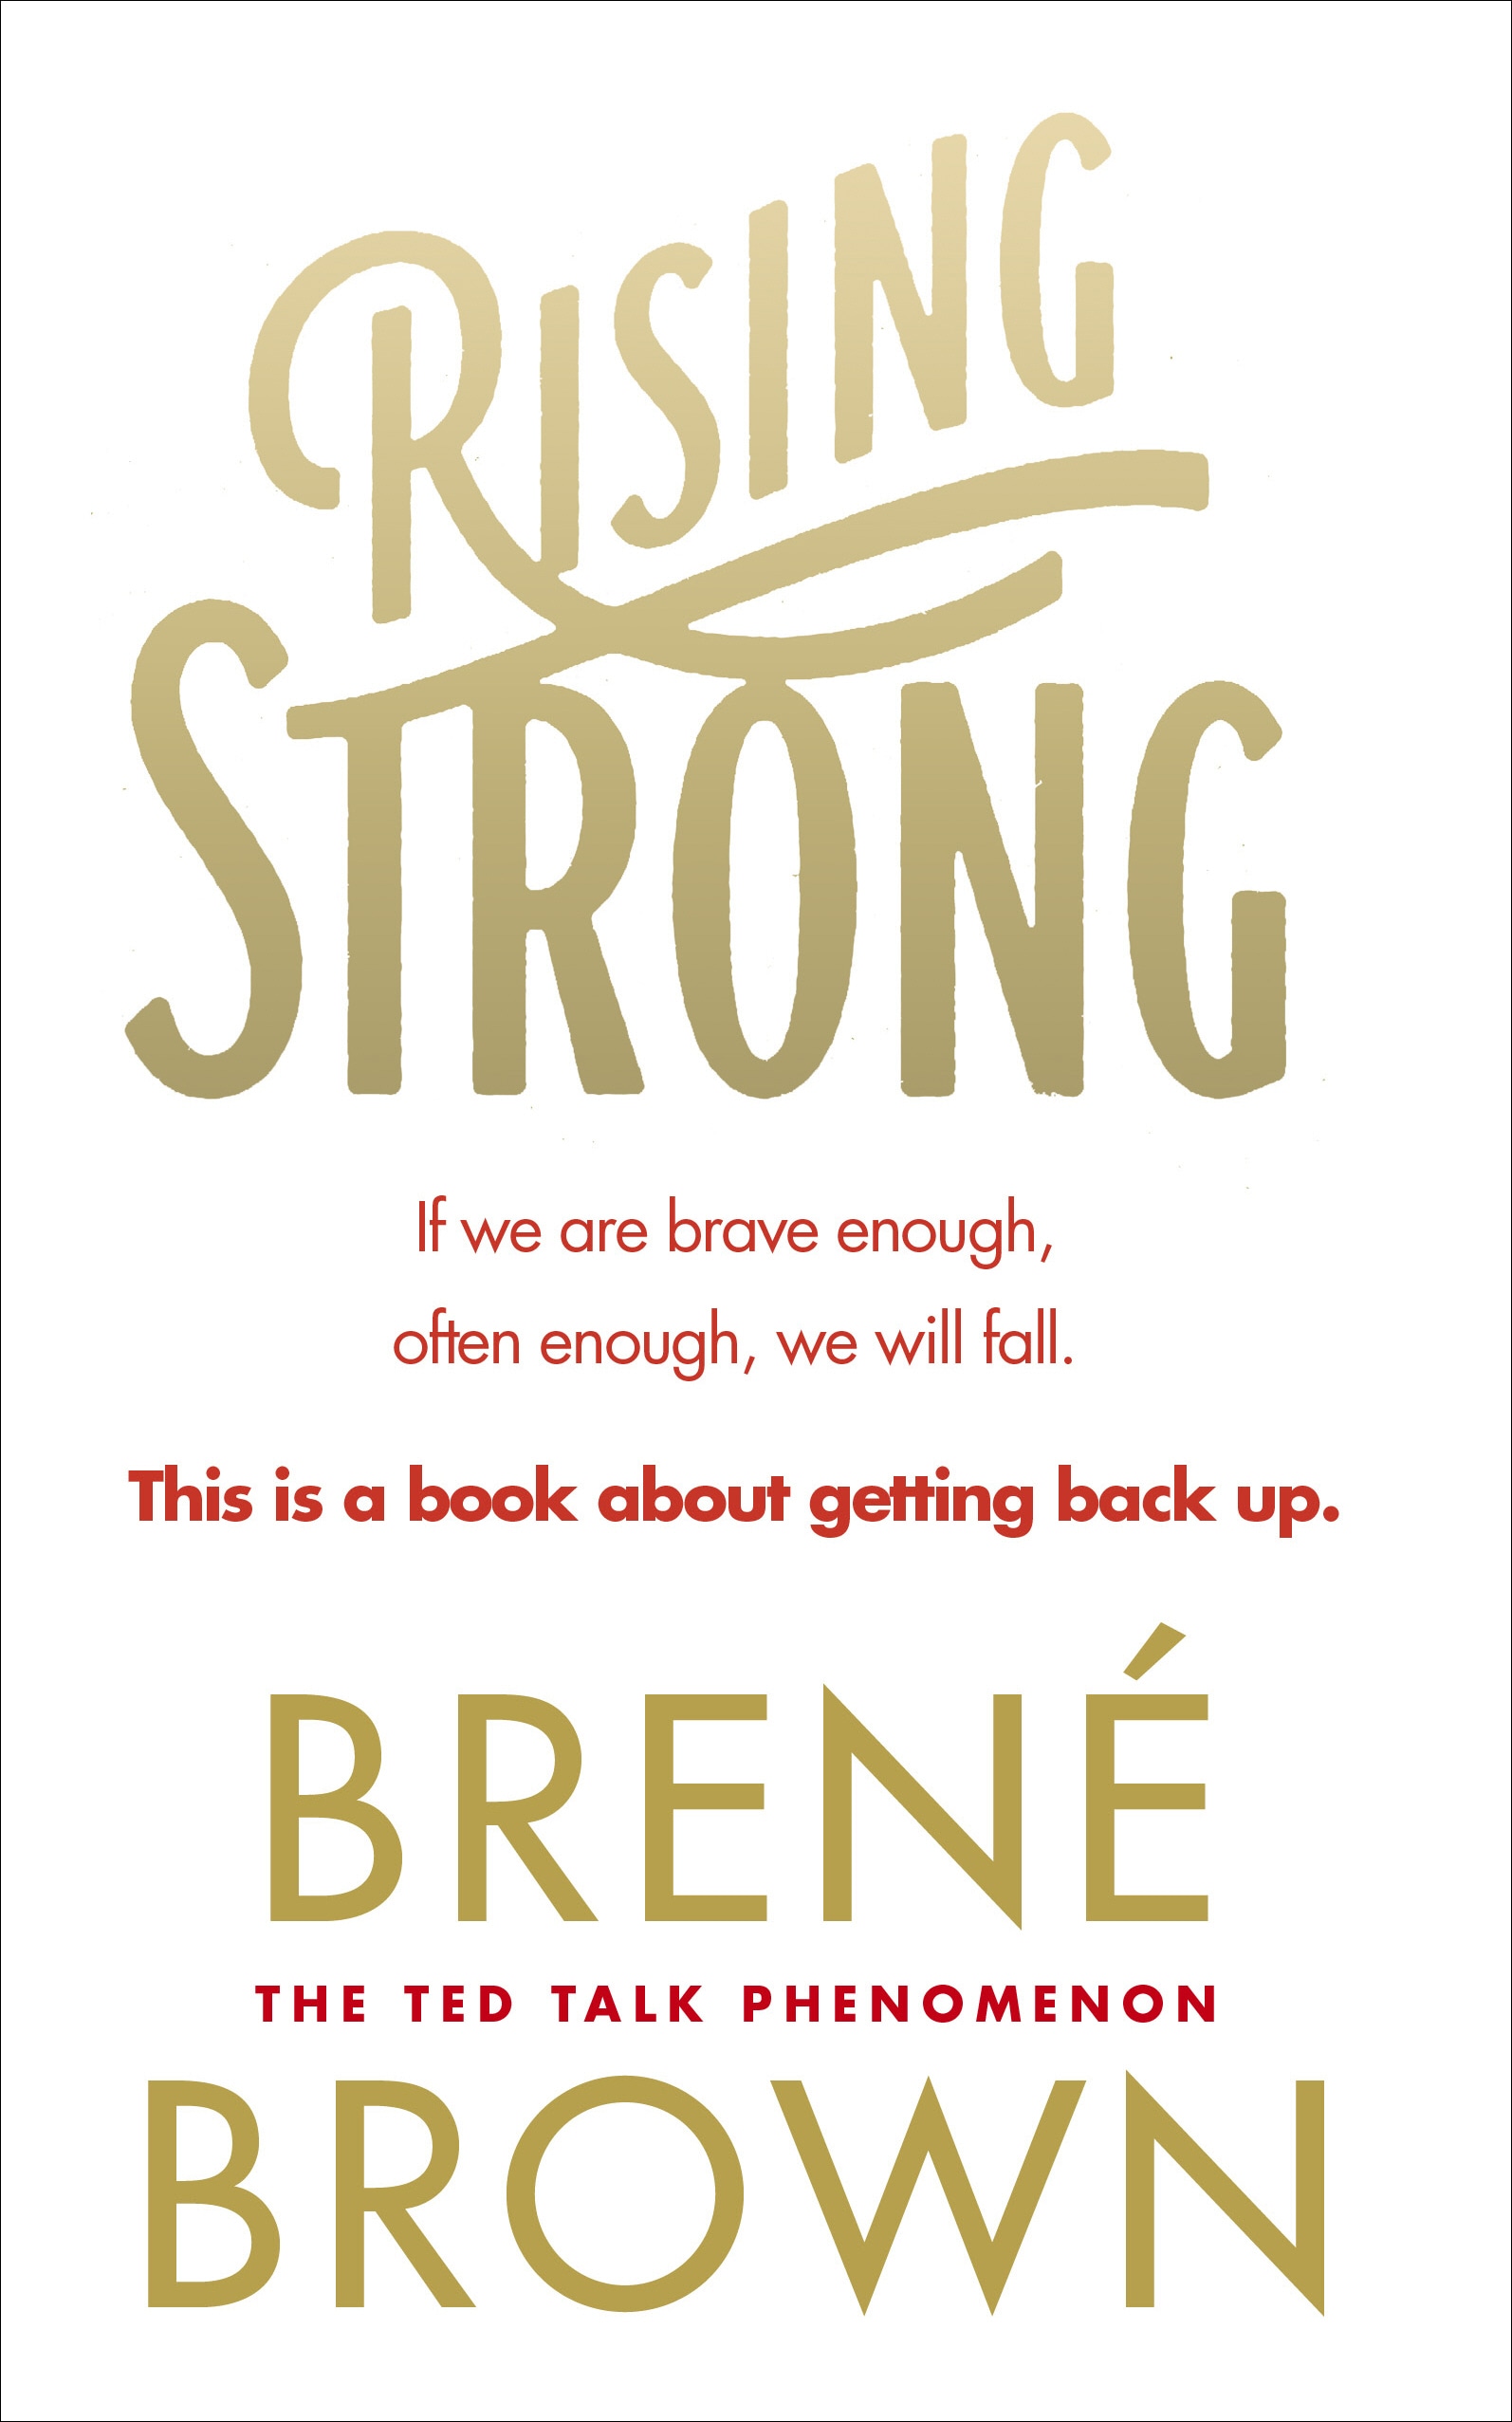 Book “Rising Strong” by Brené Brown — August 27, 2015